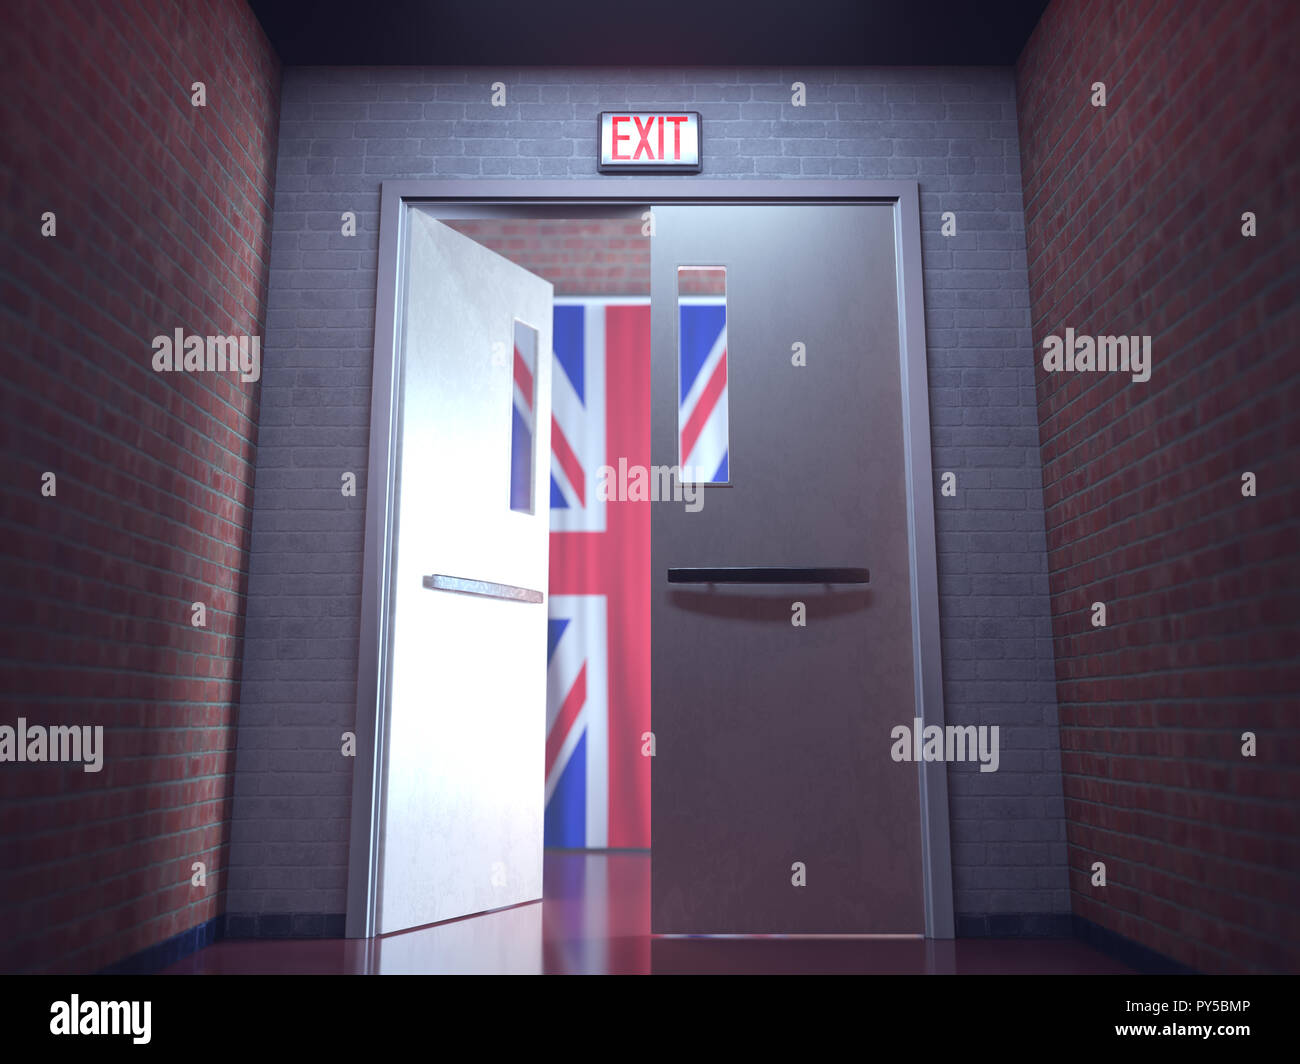 Glowing red exit sign above an open door and in the background the flag of the United Kingdom in reference to Brexit, UK leaving the European Union. Stock Photo